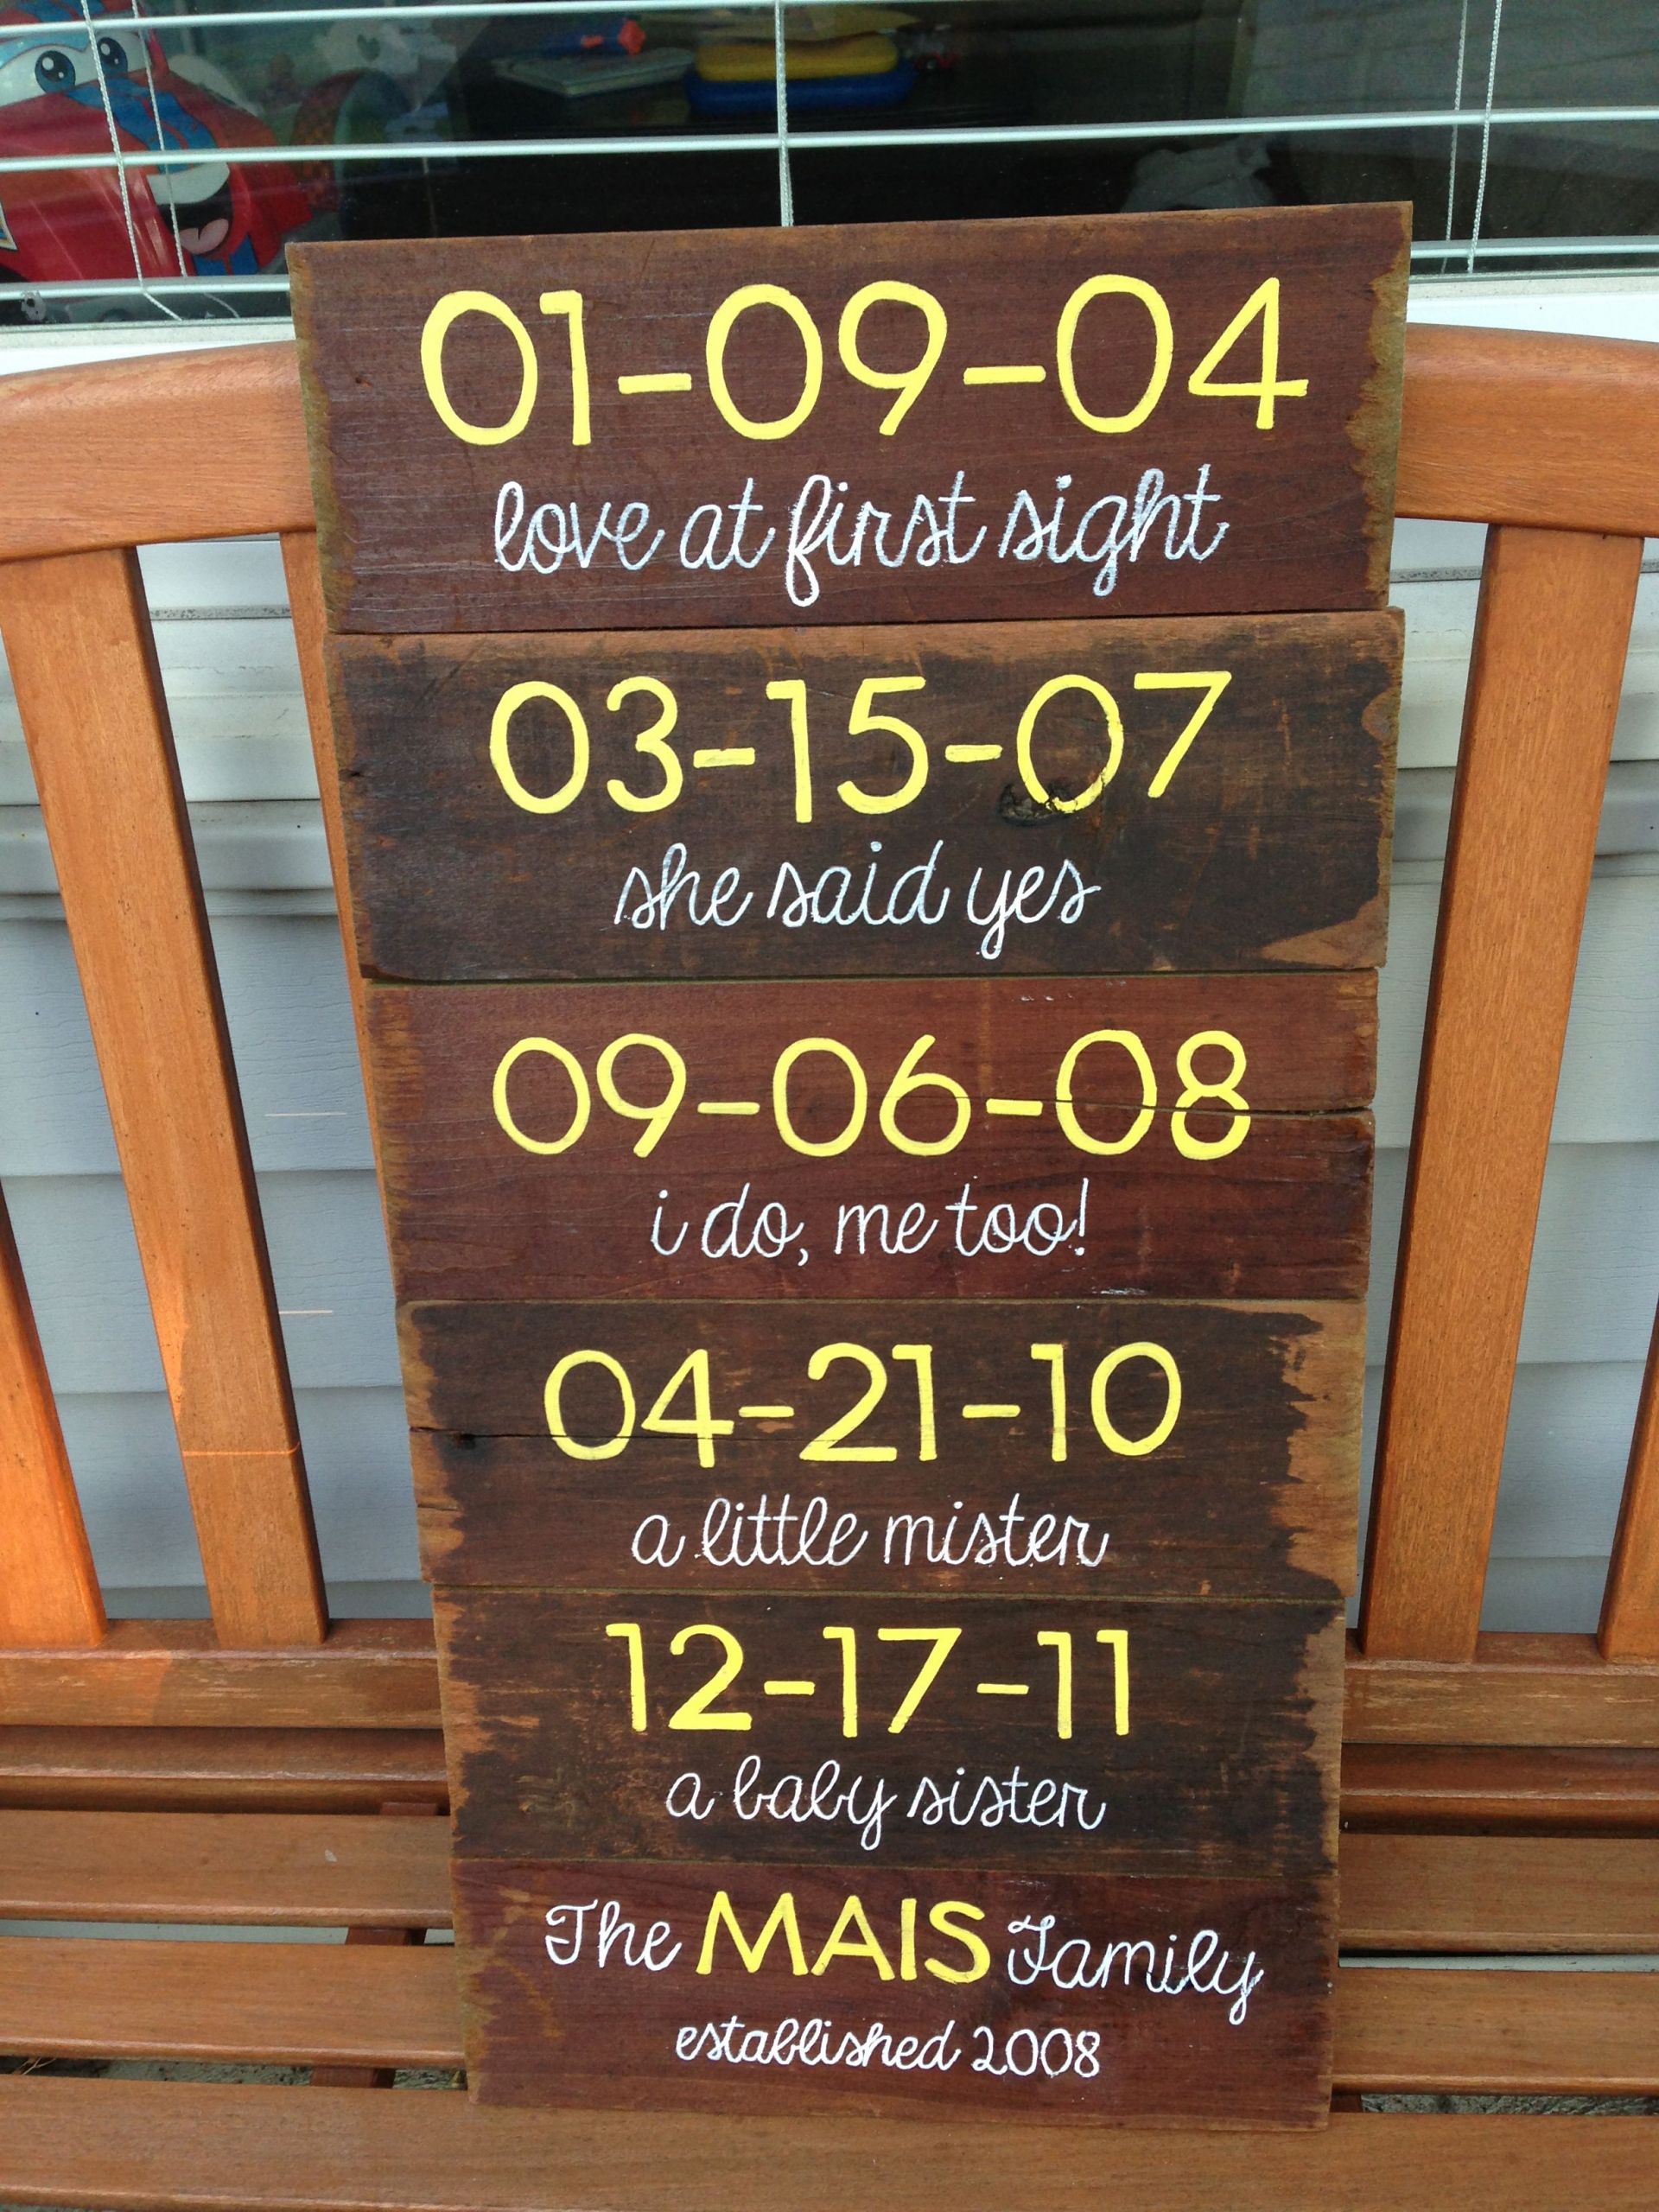 18 Year Wedding Anniversary Gift Ideas For Her
 5 year anniversary t Wood panels with special dates